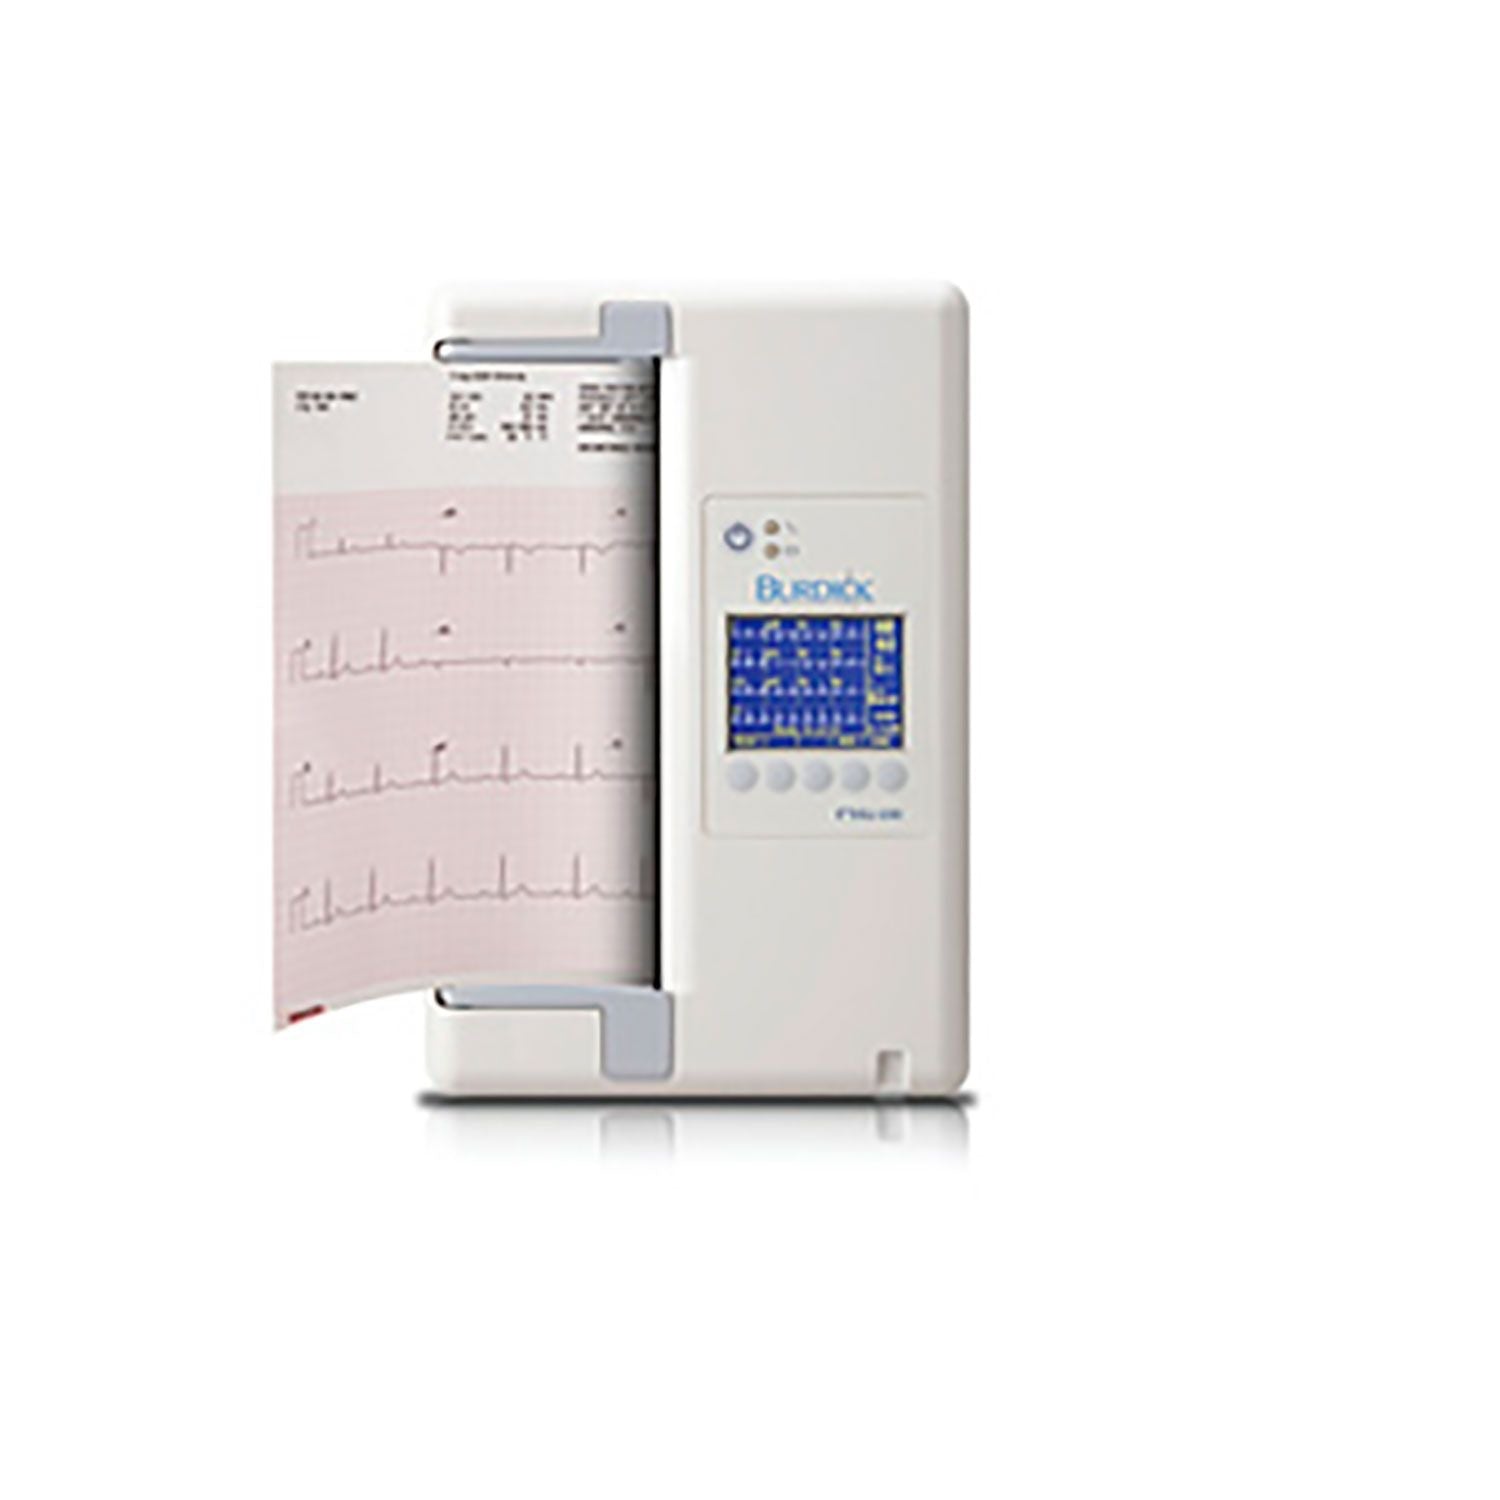 Welch Allyn/Mortara ELI230 ECG with standard patient cable